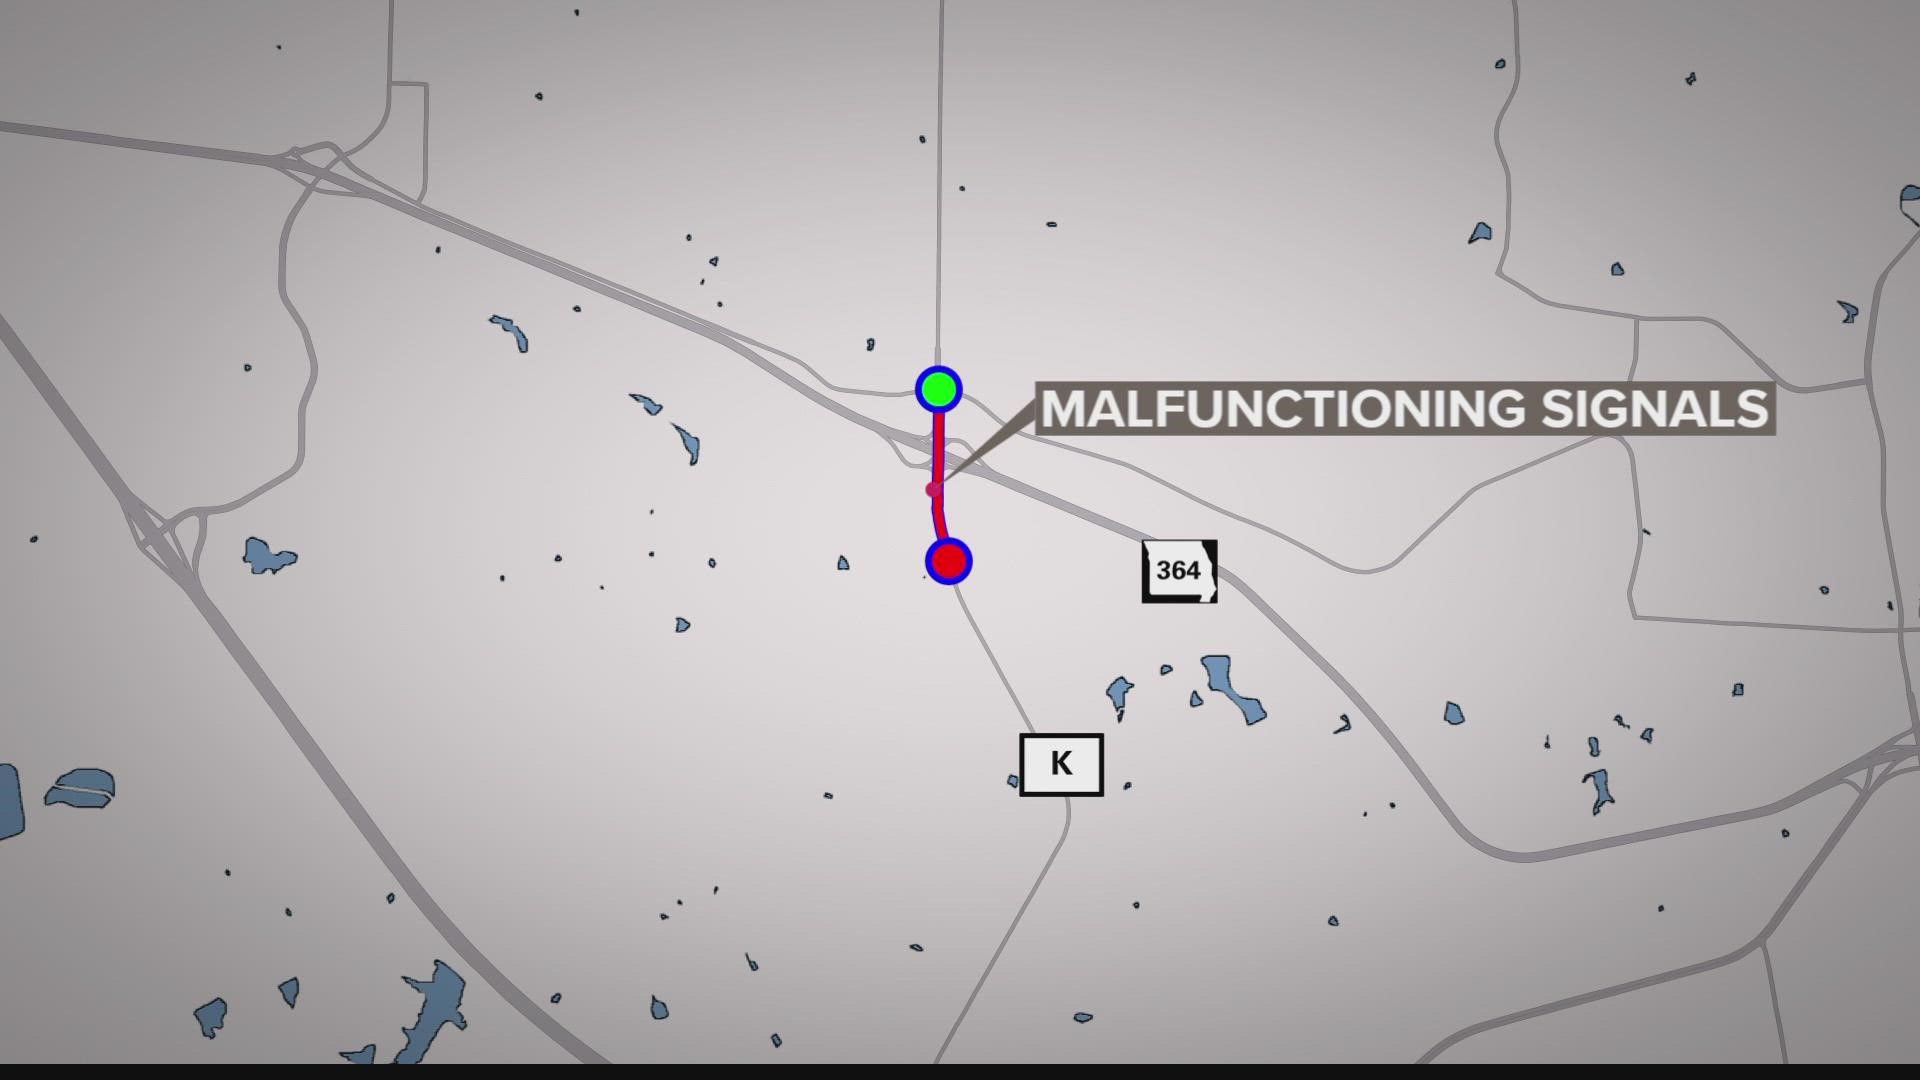 O’Fallon, Missouri police are encouraging motorists to avoid the intersection of Route K at Highway 364 due to malfunctioning signals.